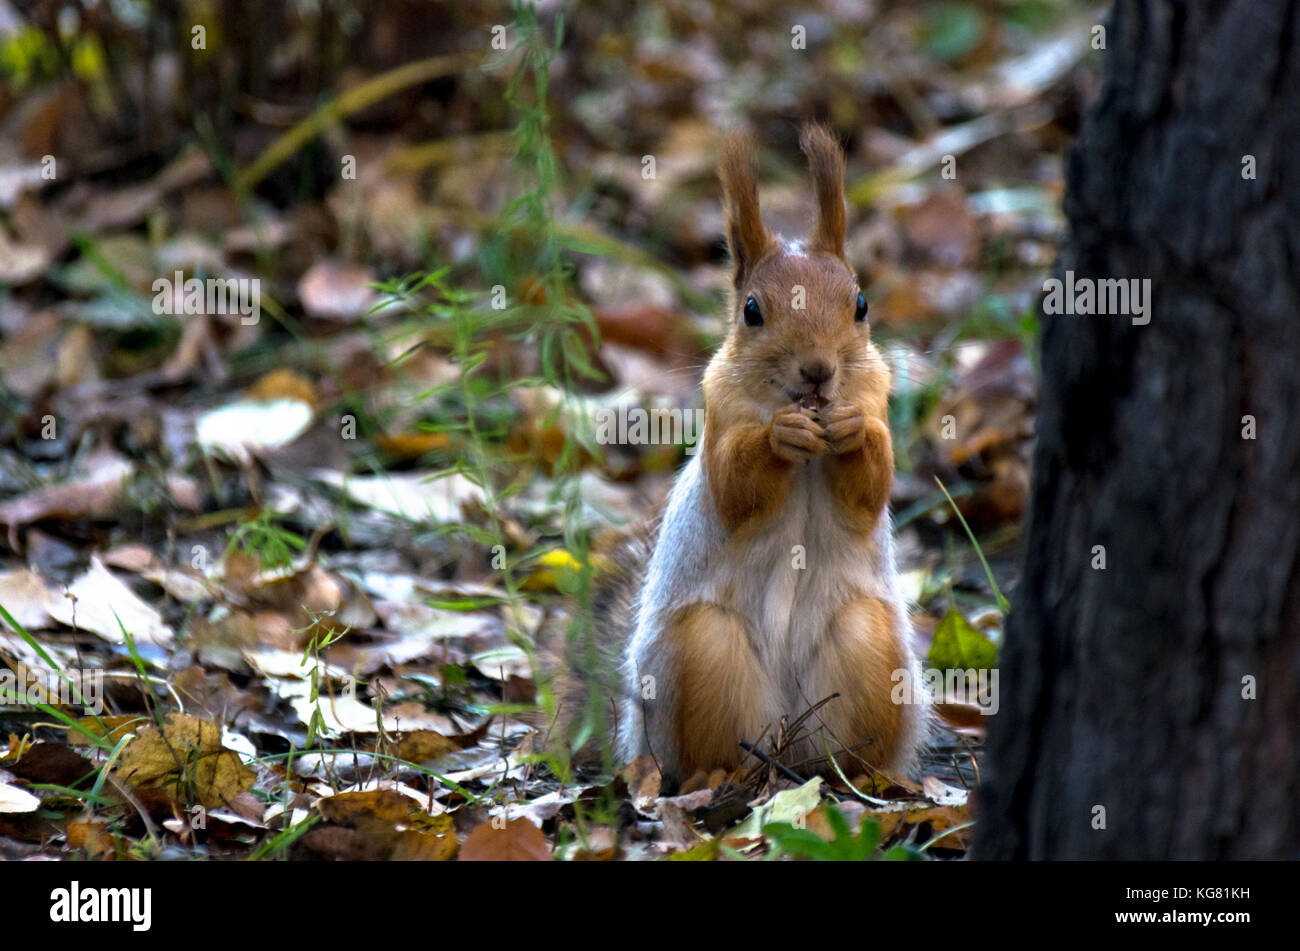 A red squirrel sitting on the ground, eating nuts in the autumn park, green grass, yellow leaves Stock Photo